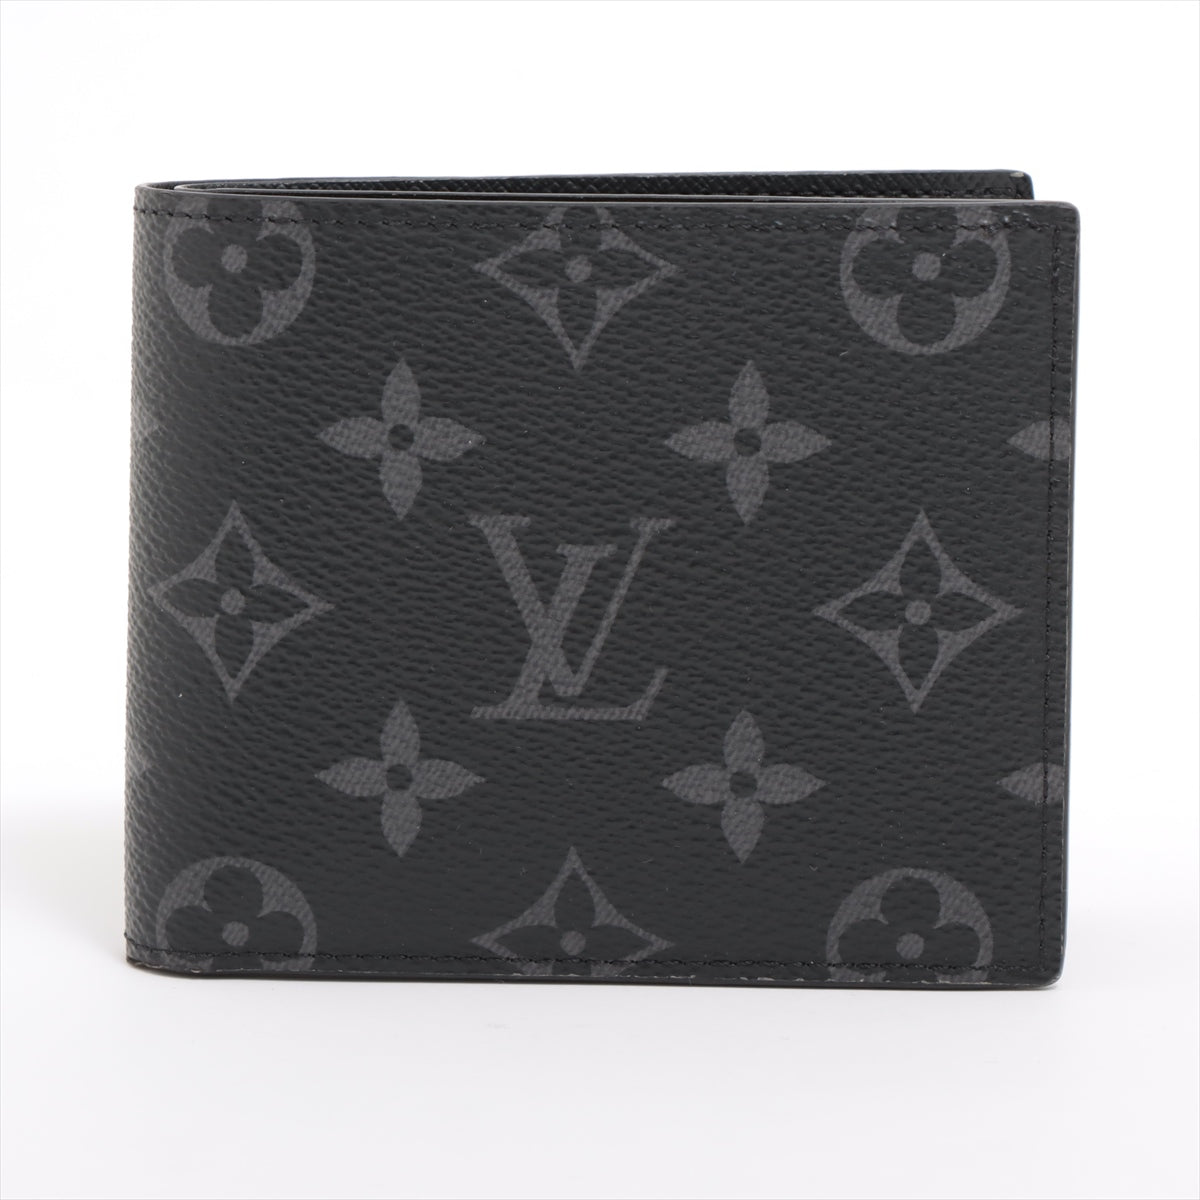 Louis Vuitton Monogram Eclipse Portefeuille Marco NM M62545 There was an RFID response